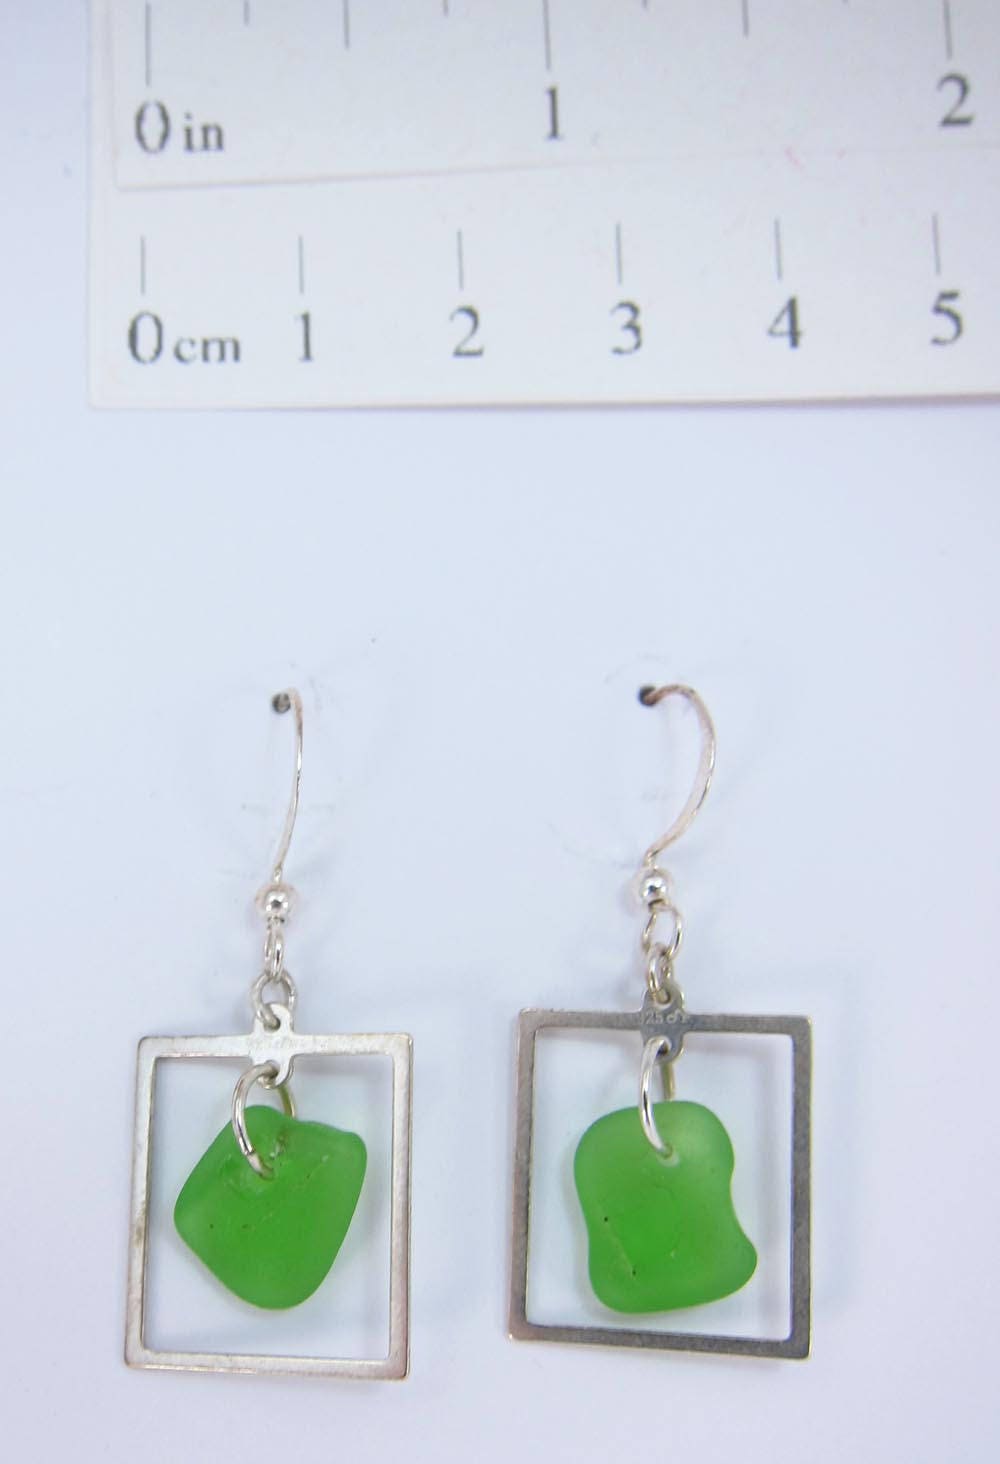 Framed! Earrings with green sea glass from Cape Breton, Nova Scotia, Canada framed in sterling silver on a nickle-free hook